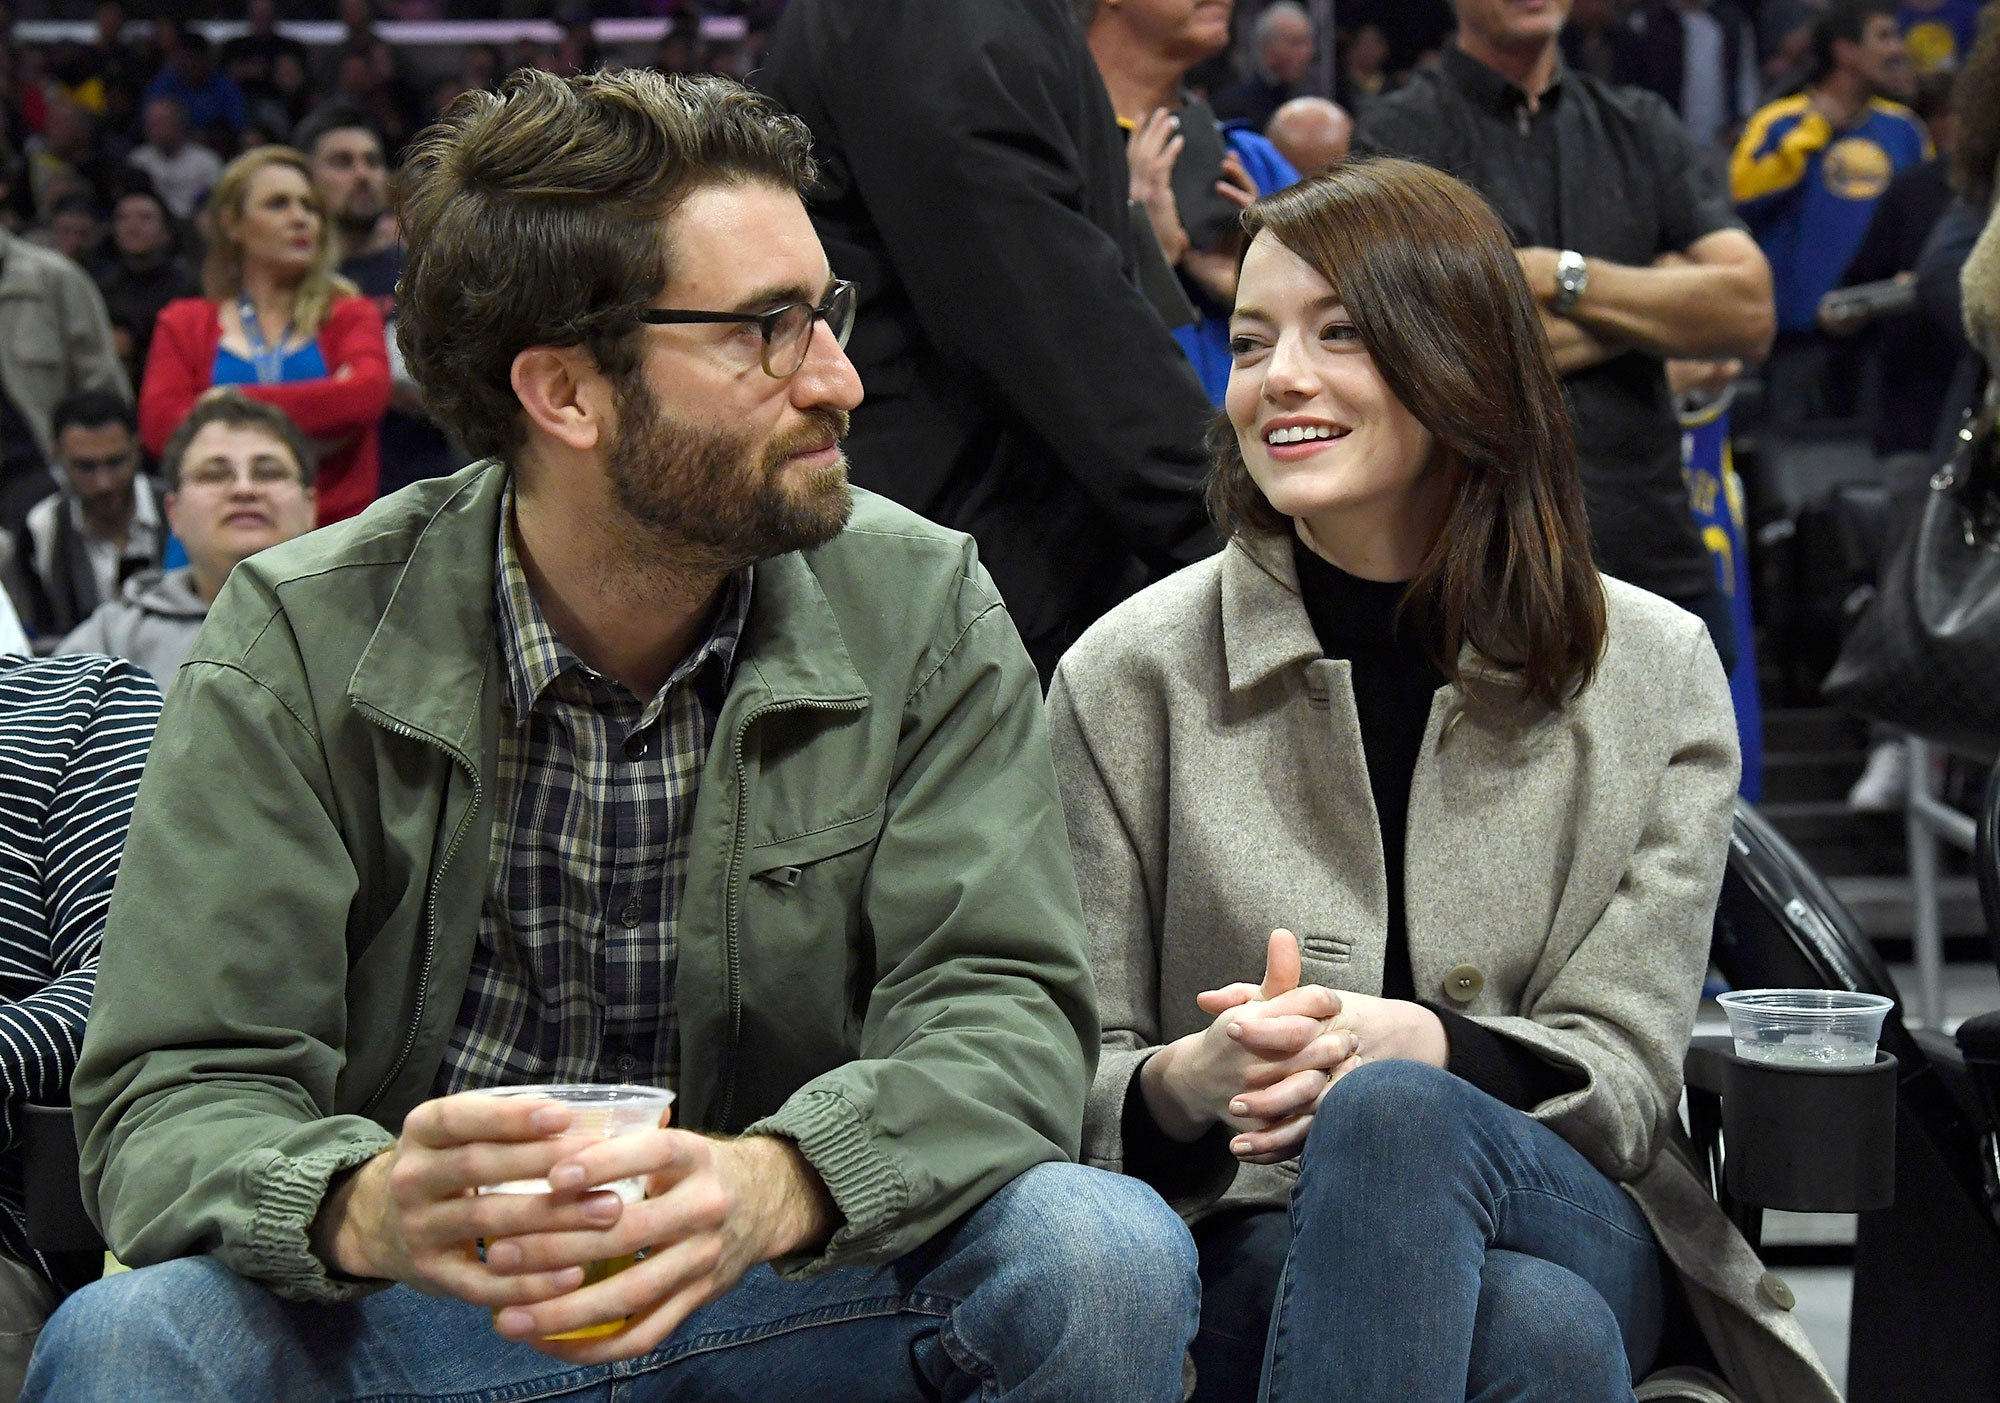 LOS ANGELES, CA - JANUARY 18: Emma Stone and Dave McCary attend the Golden State Warriors and Los Angeles Clippers basketball game at Staples Center on January 18, 2019 in Los Angeles, California. NOTE TO USER: User expressly acknowledges and agrees that, by downloading and or using this photograph, User is consenting to the terms and conditions of the Getty Images License Agreement. (Photo by Kevork Djansezian/Getty Images)